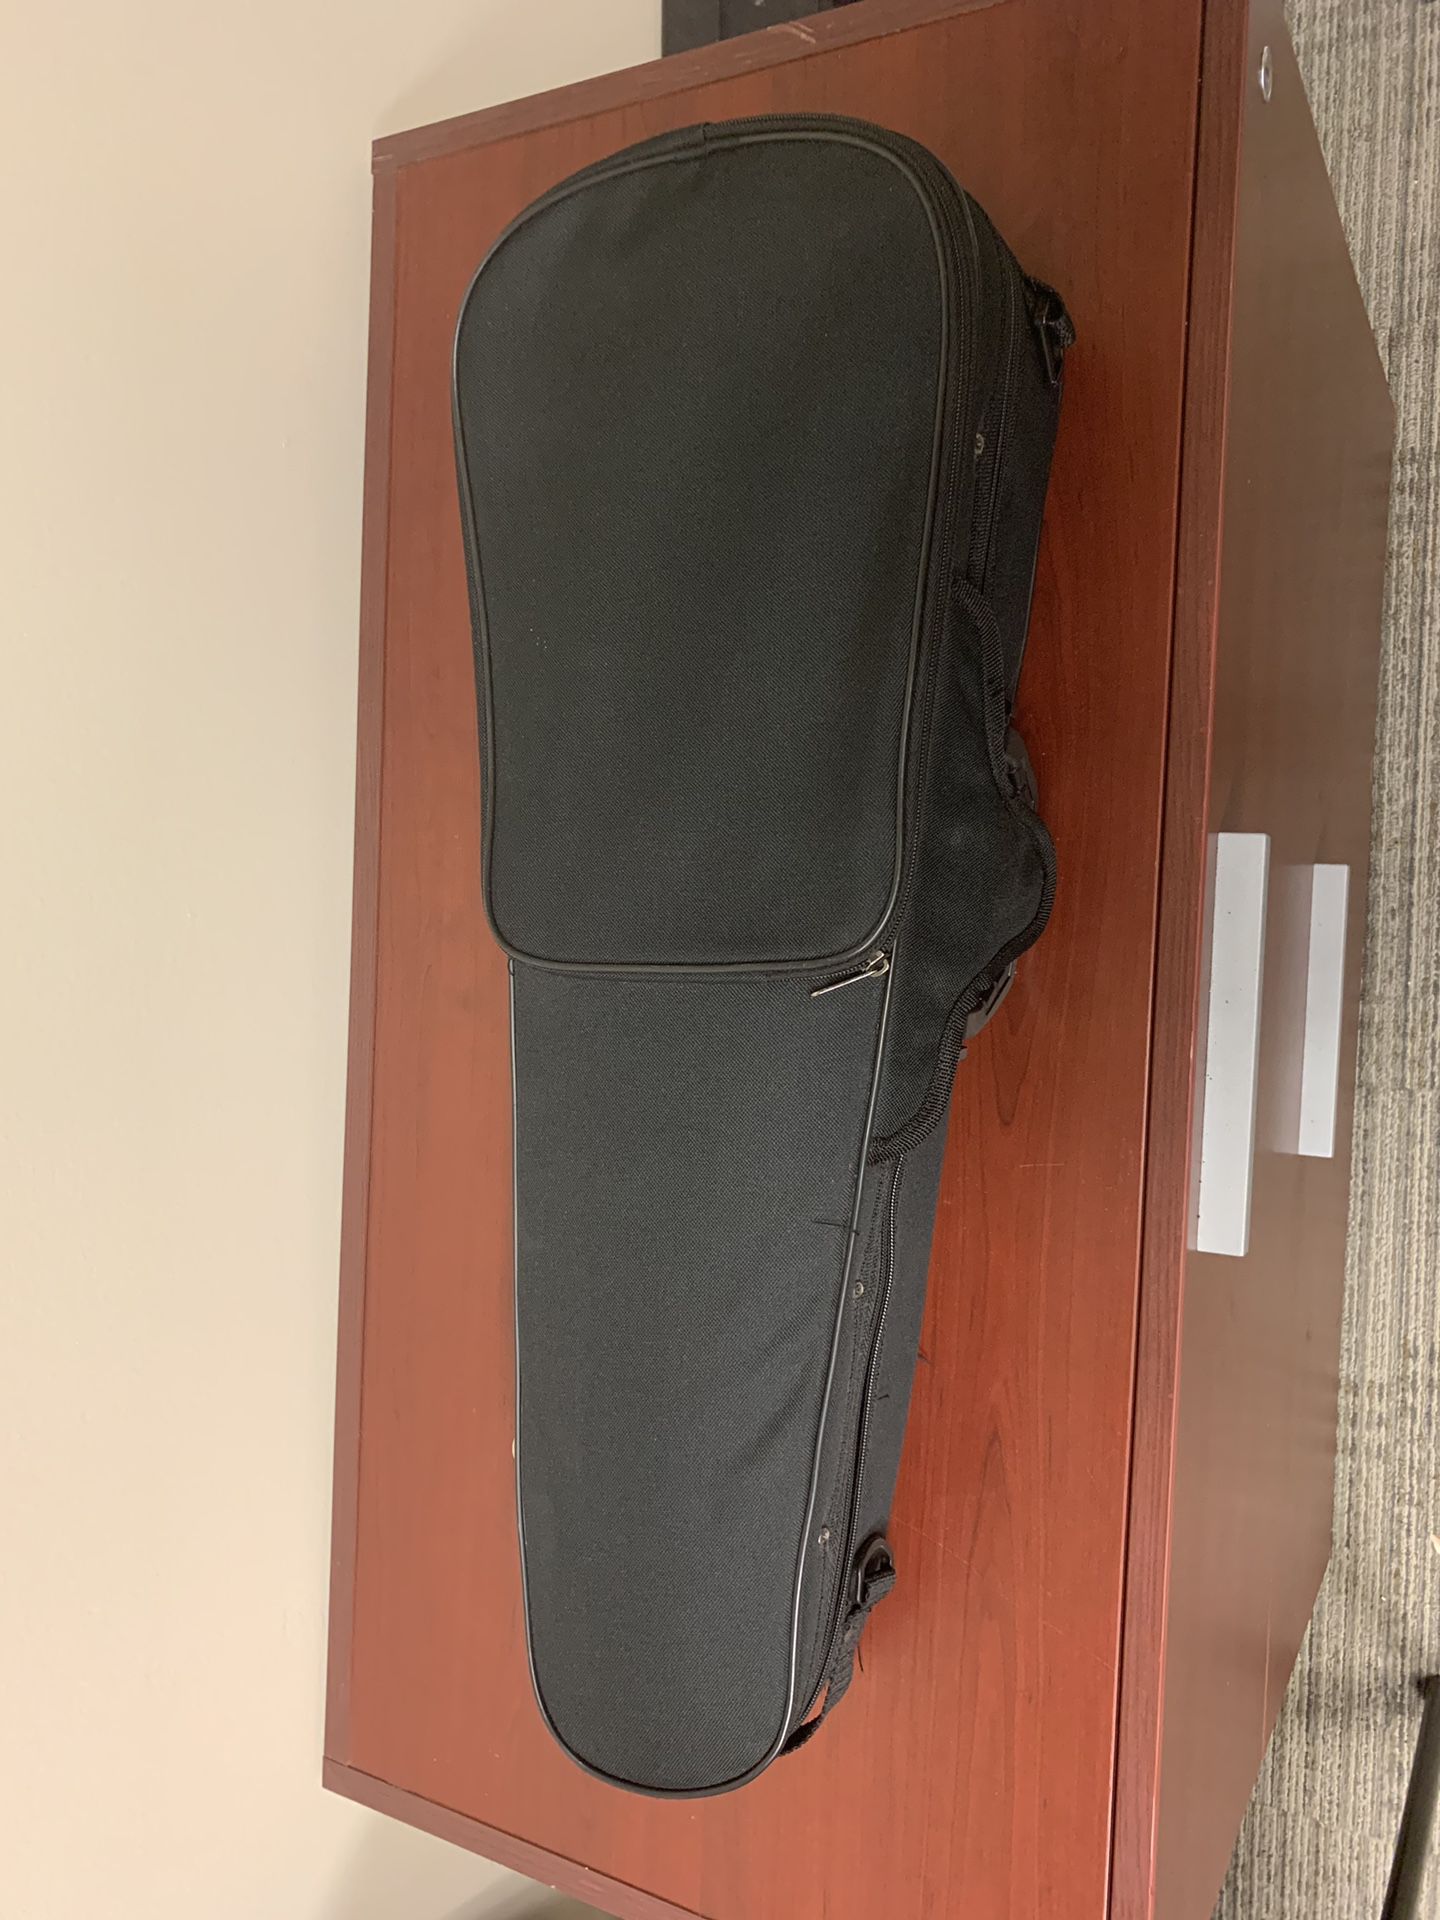 1/4 Violin Palatino VN450 -1/4 in Case with bow